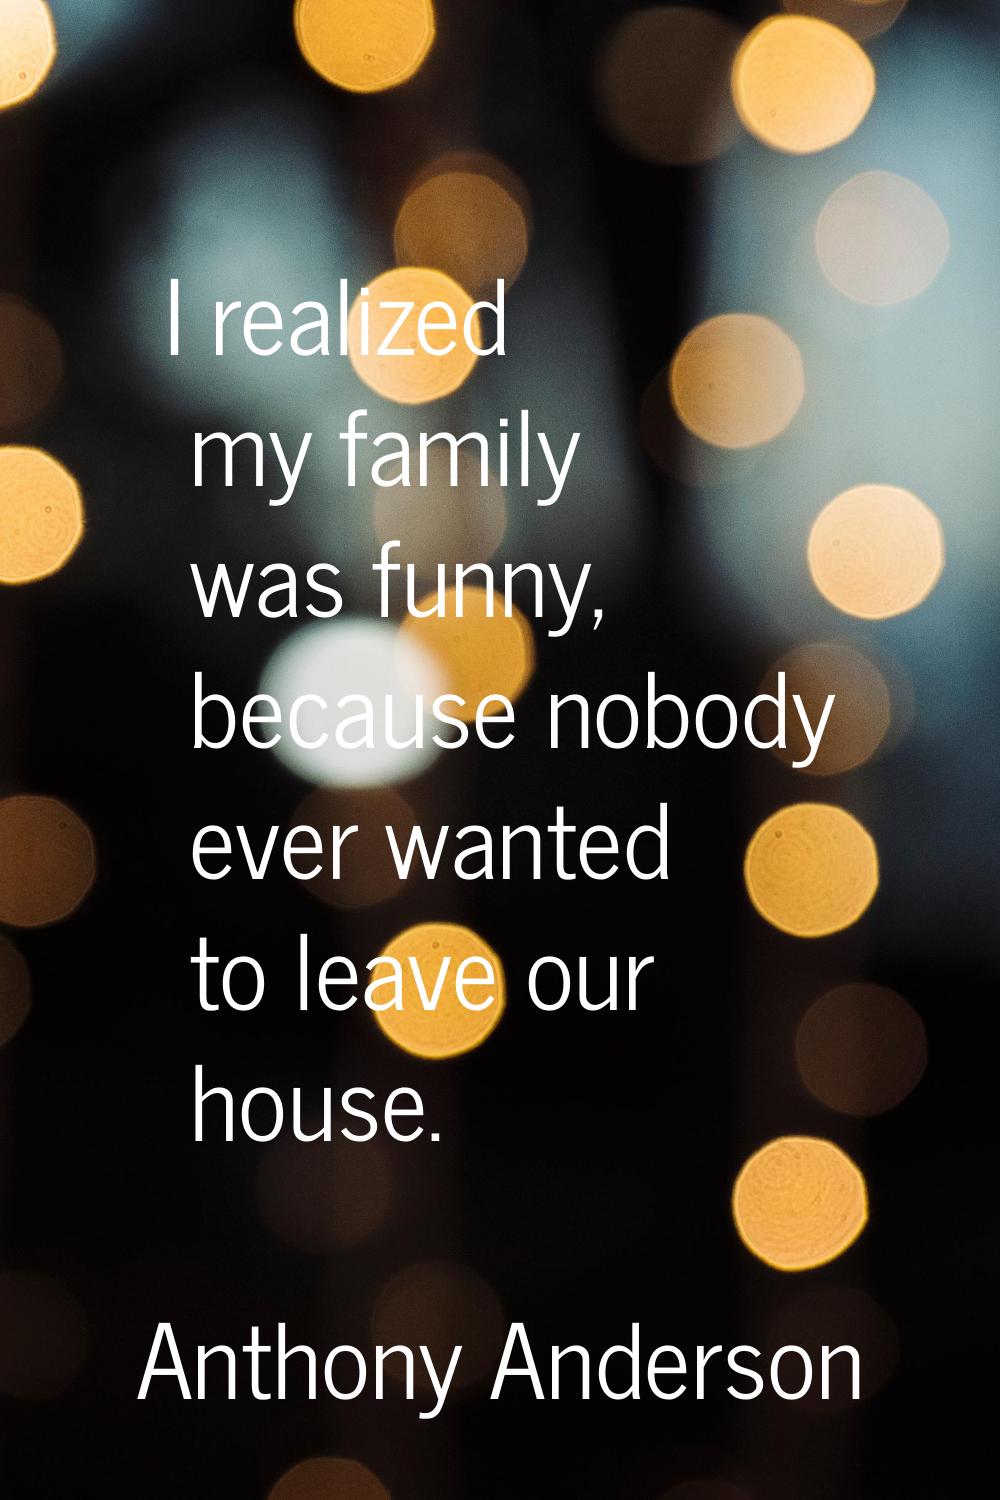 I realized my family was funny, because nobody ever wanted to leave our house.